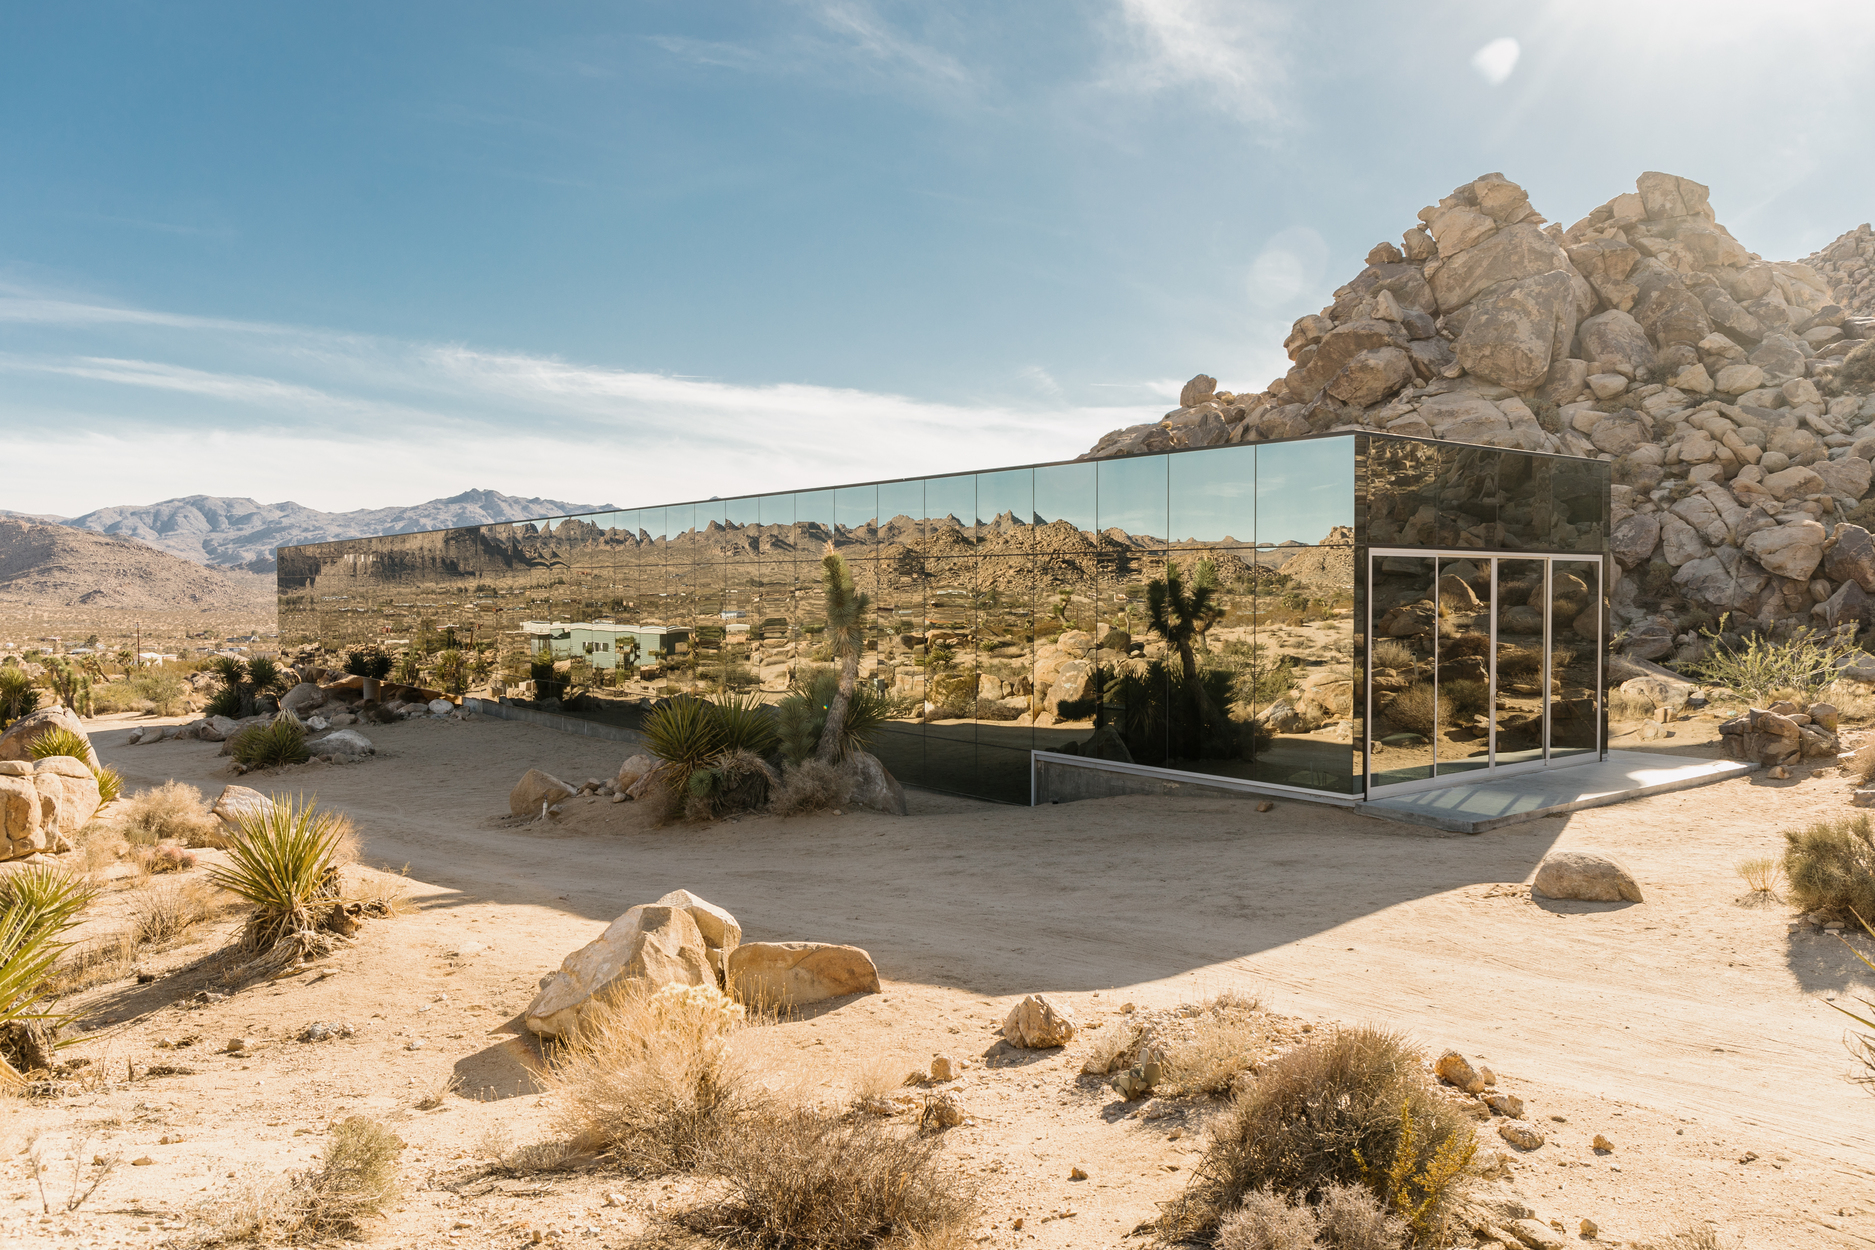 DISCOVER UNUSUAL PLACES TO STAY: Invisible House Joshua Tree 創意旅宿 - 漠地裡的隱形旅宿